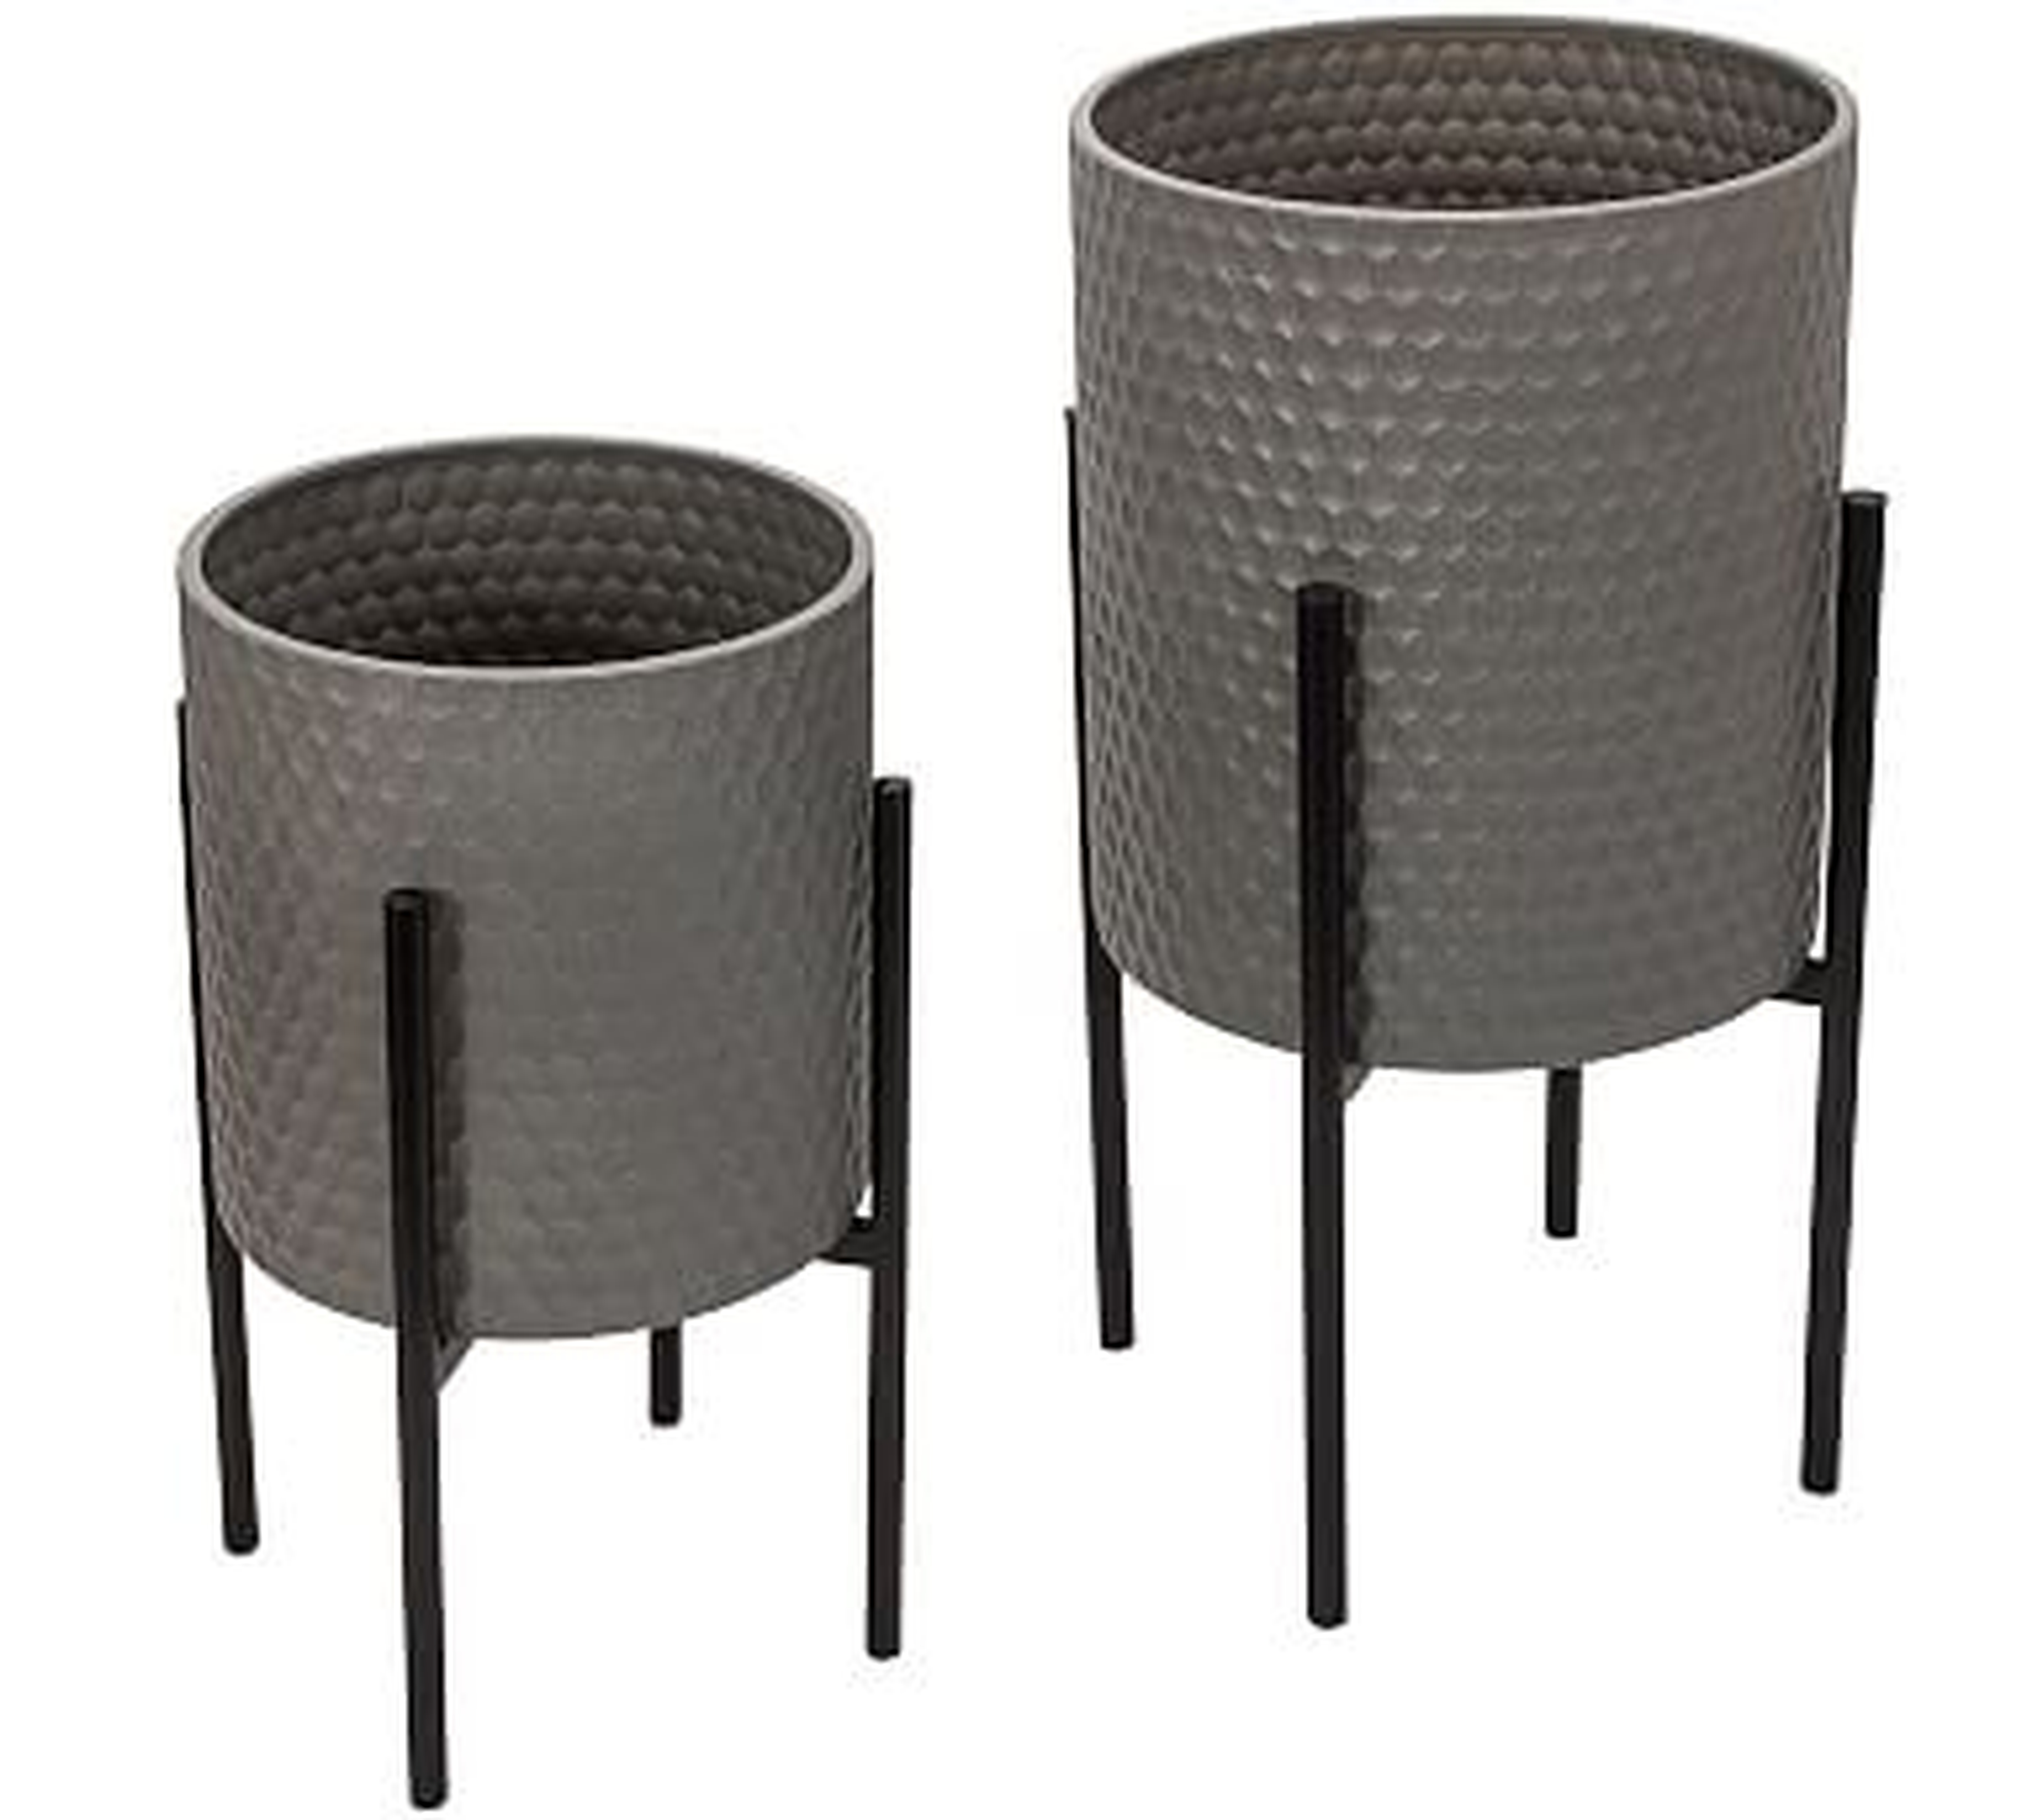 Bella Gray Patterned Raised Planters with Black Stand, Set of 2 - Pottery Barn